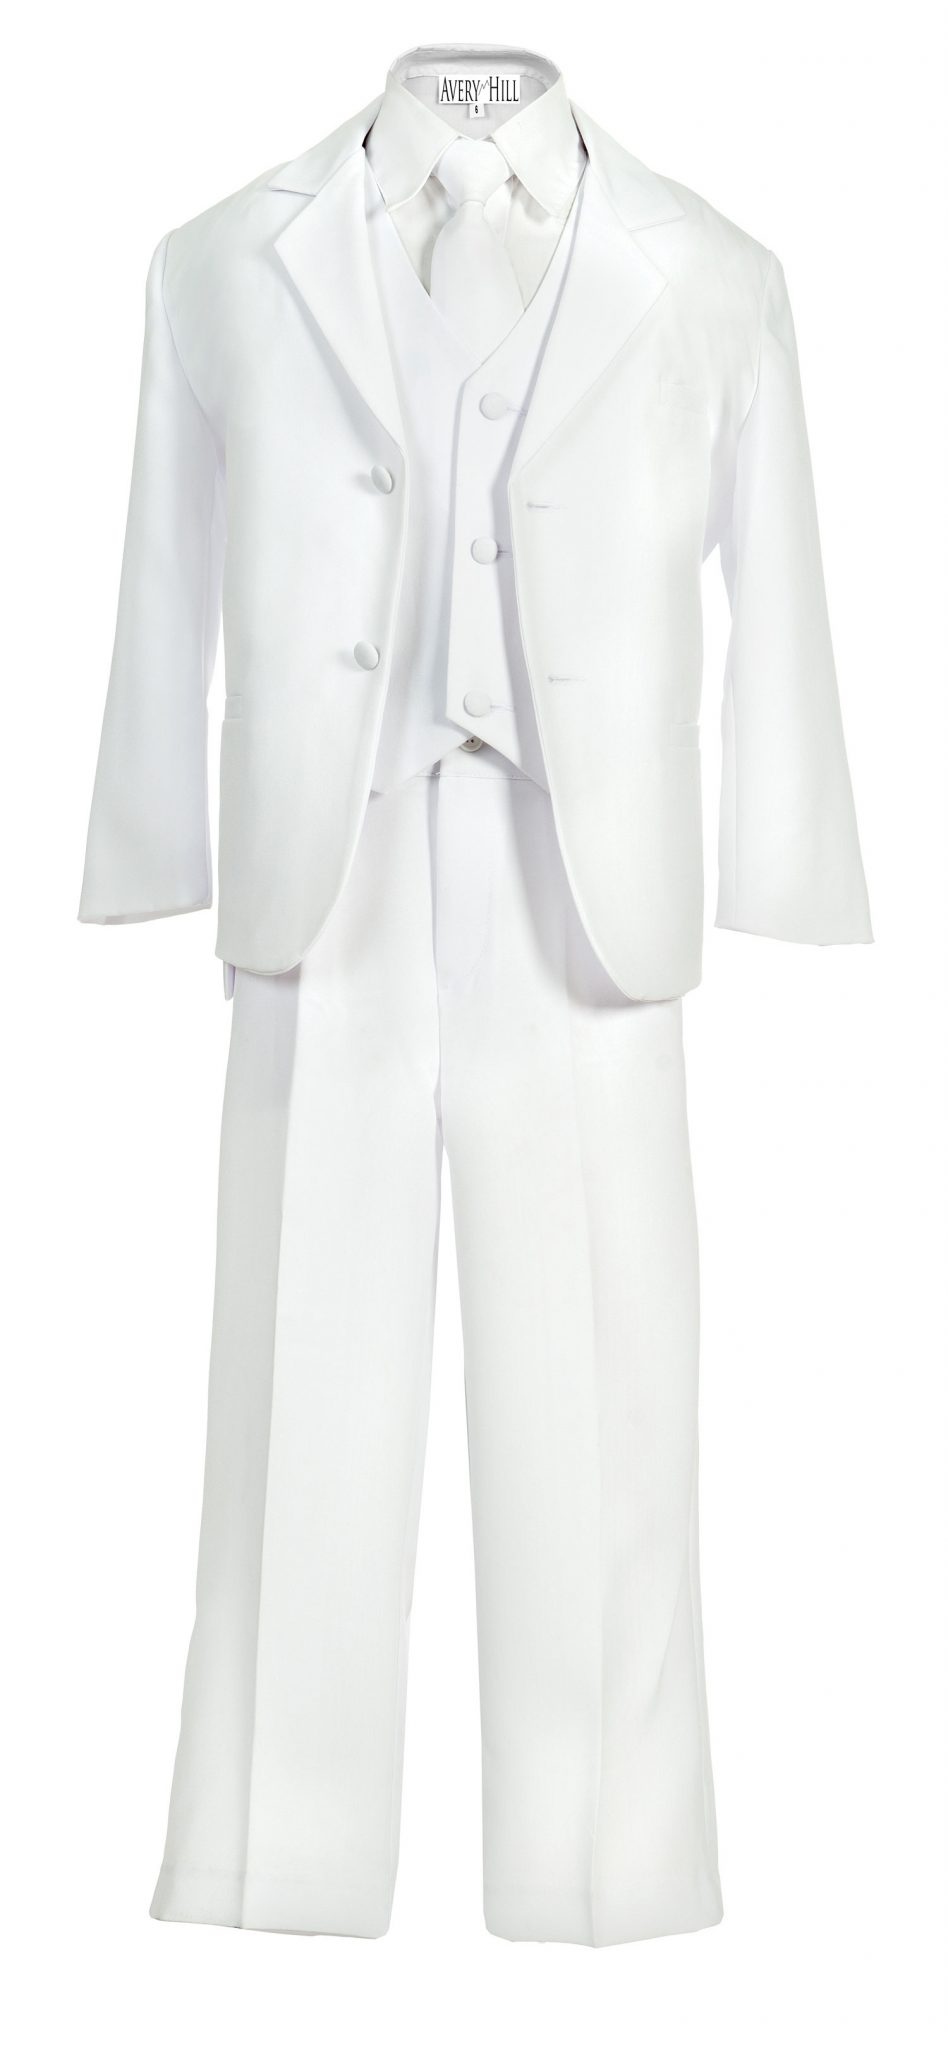 Avery Hill Boys Formal 5 Piece Suit with Shirt and Vest White - 8